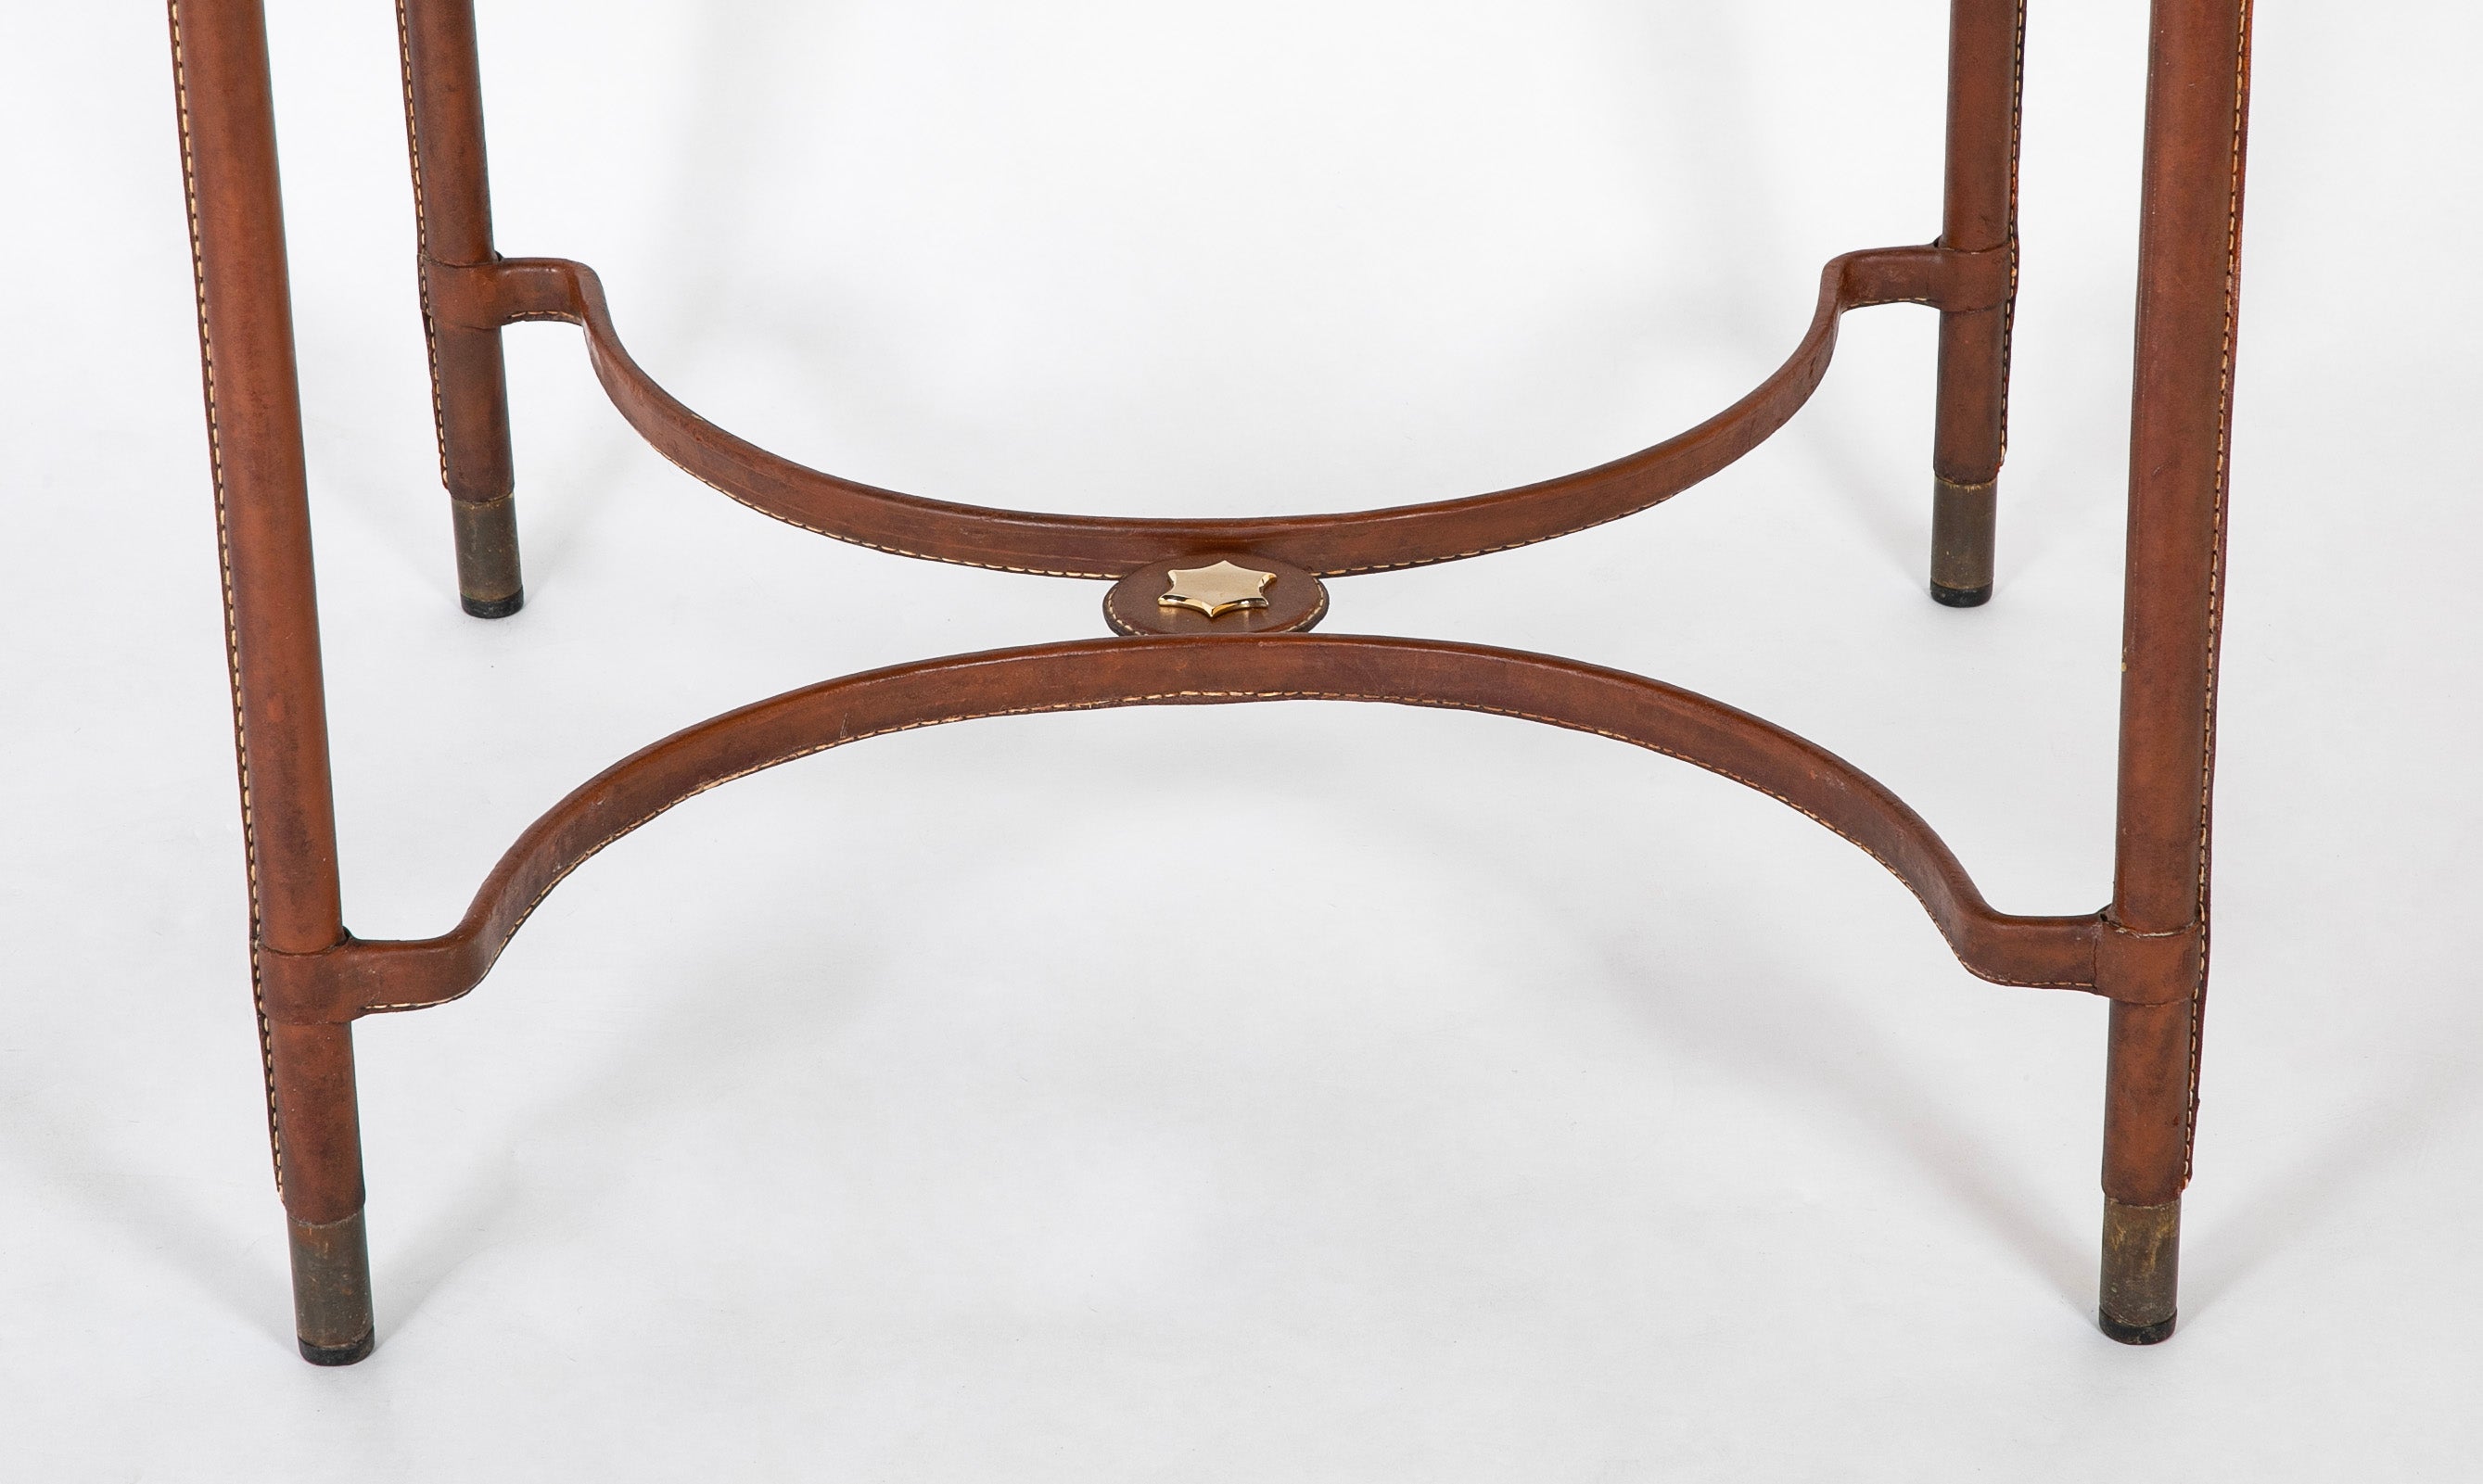 A Leather Wrapped Games Table Attributed to Adnet